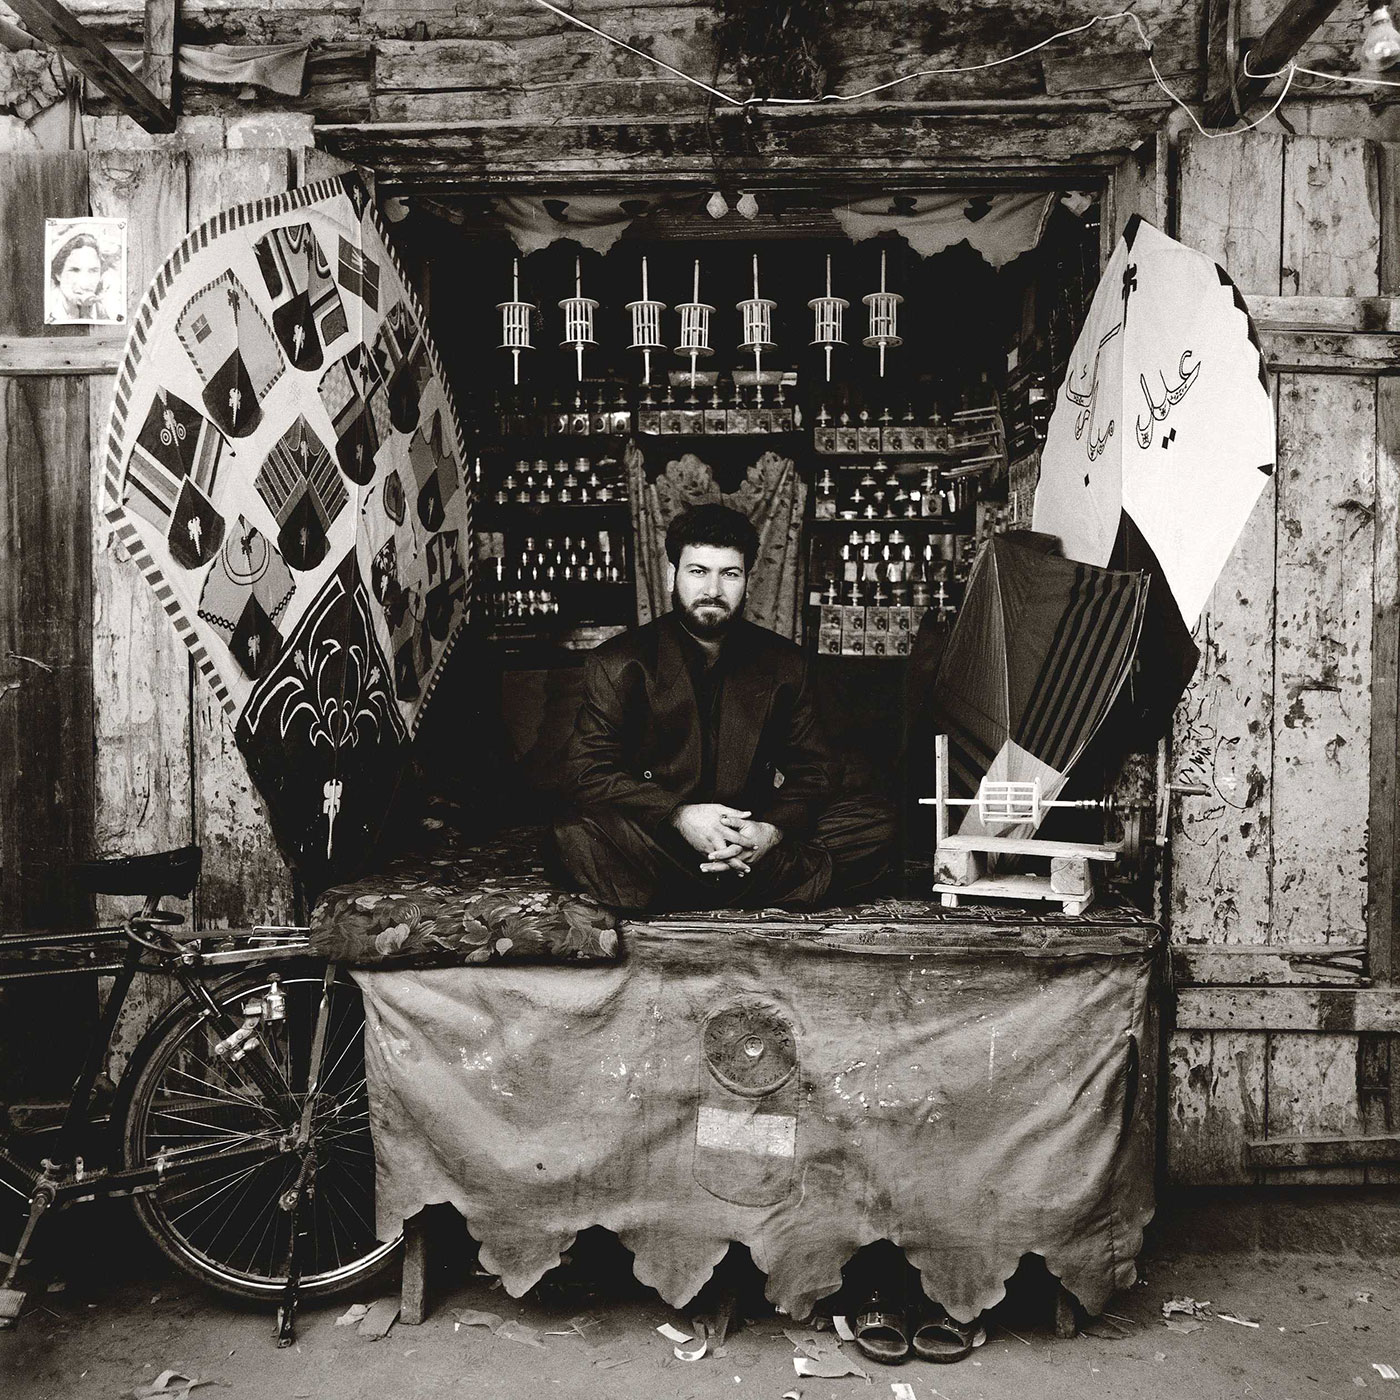 Black and white photograph of a man wearing a dark suit. He is sitting in a market stall decorated with kite-making tools and designs.